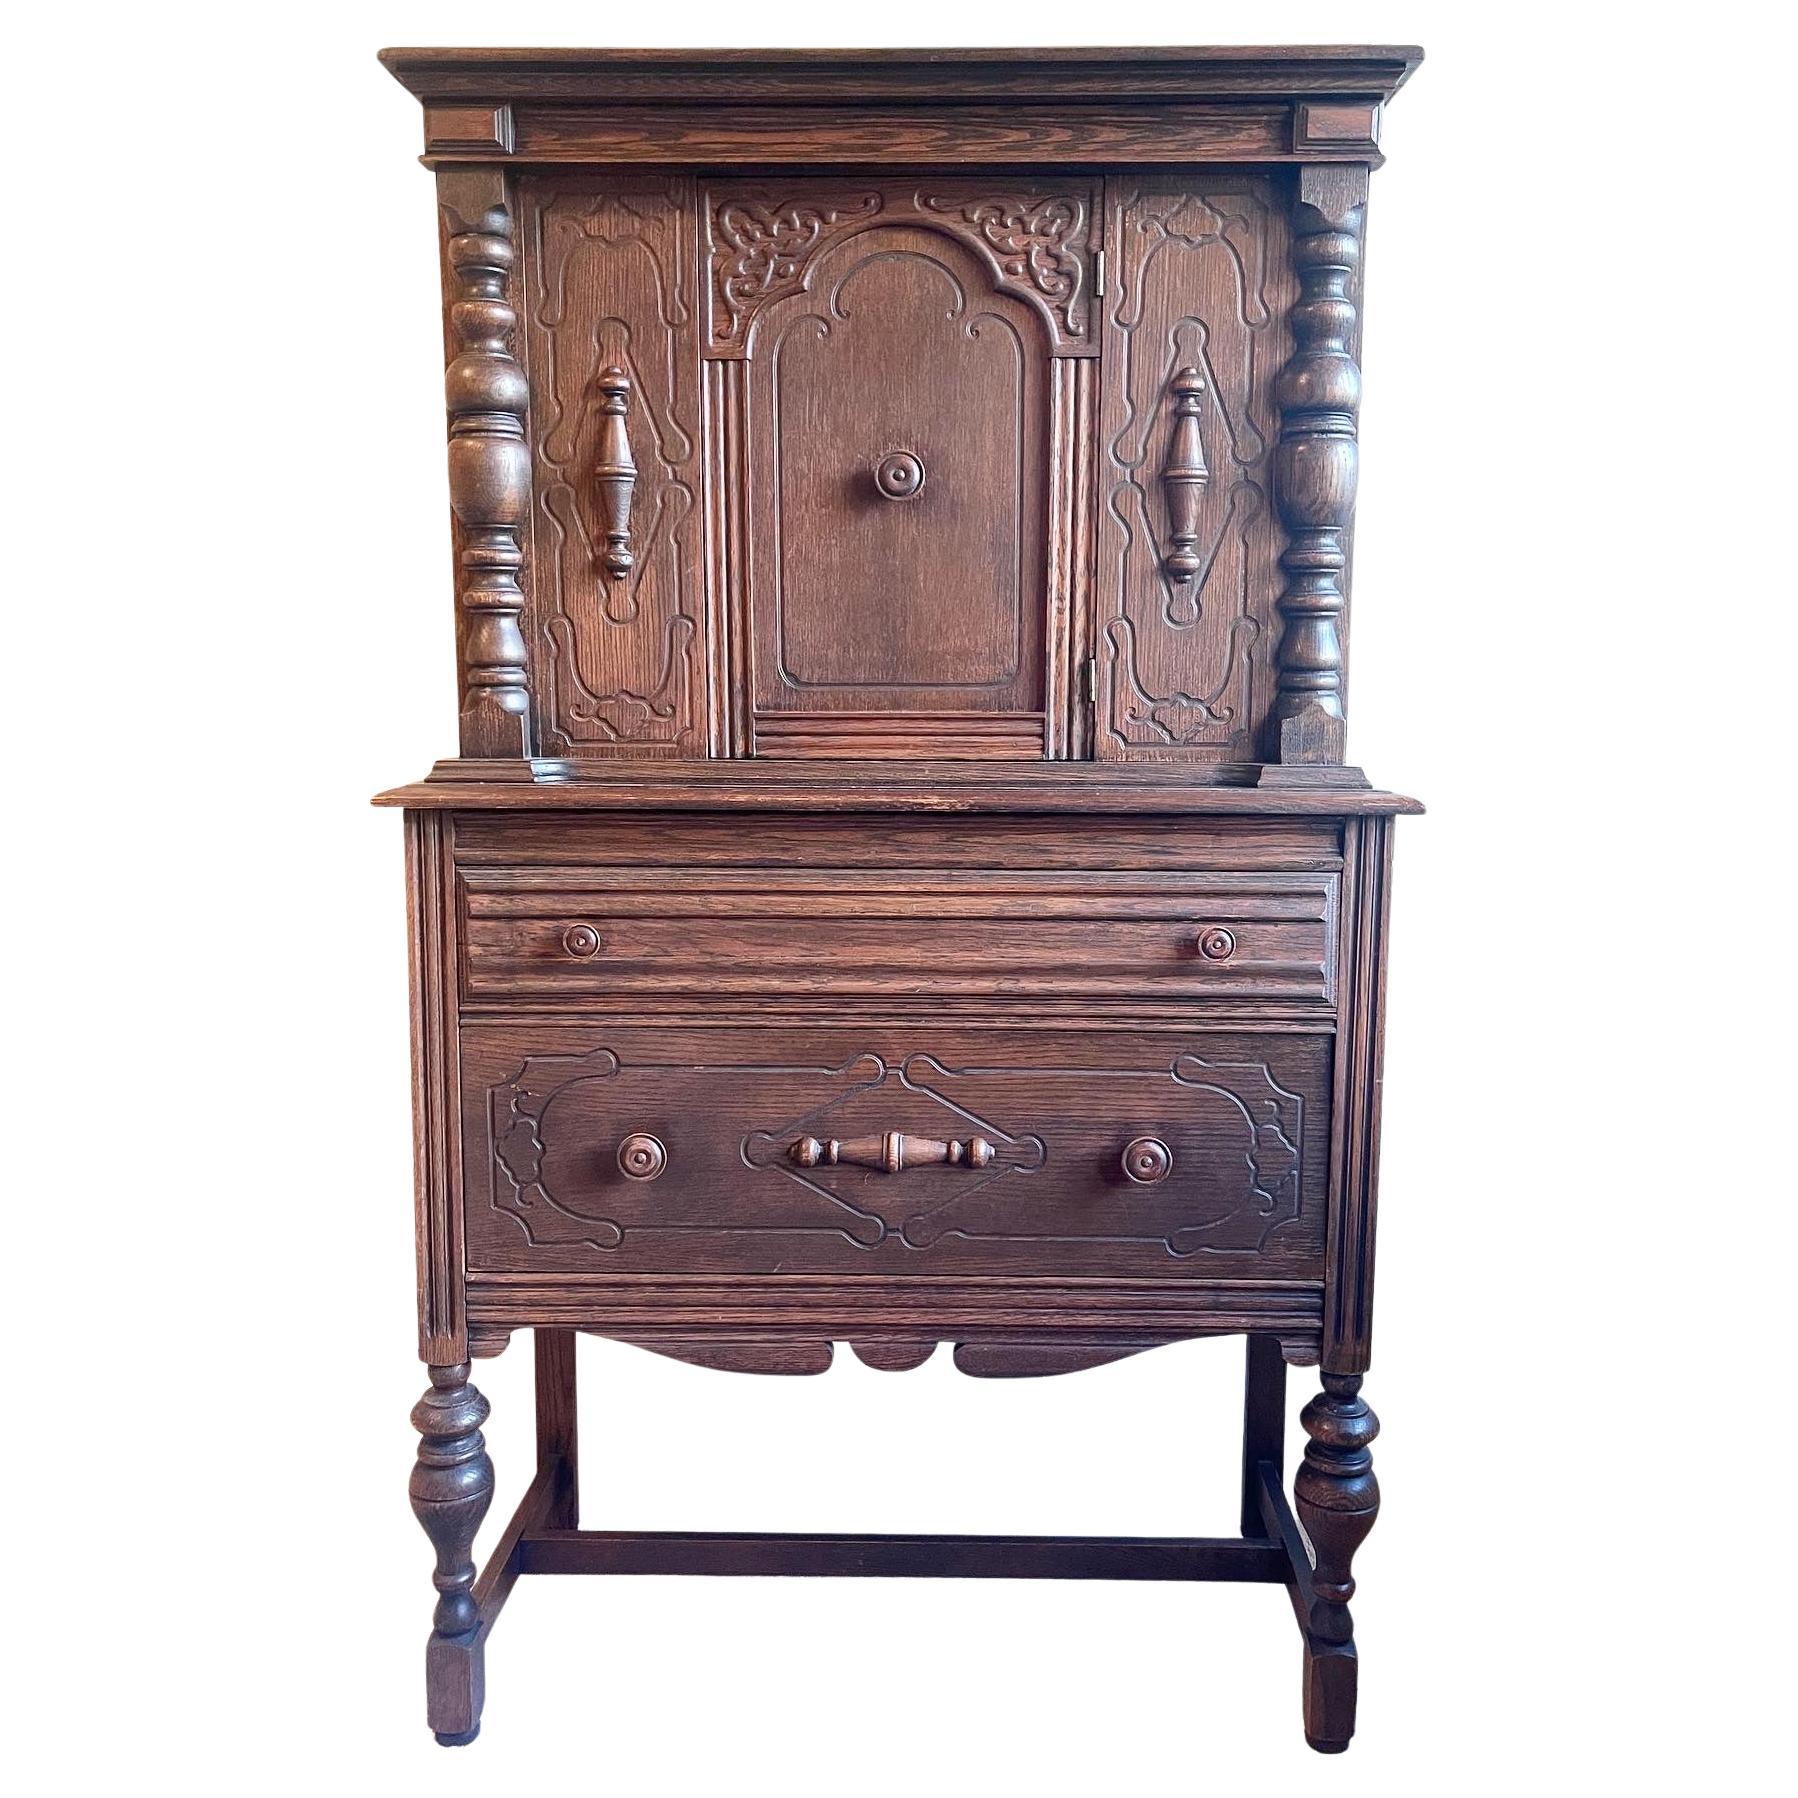 19th Century Antique Hand Carved Cabinet